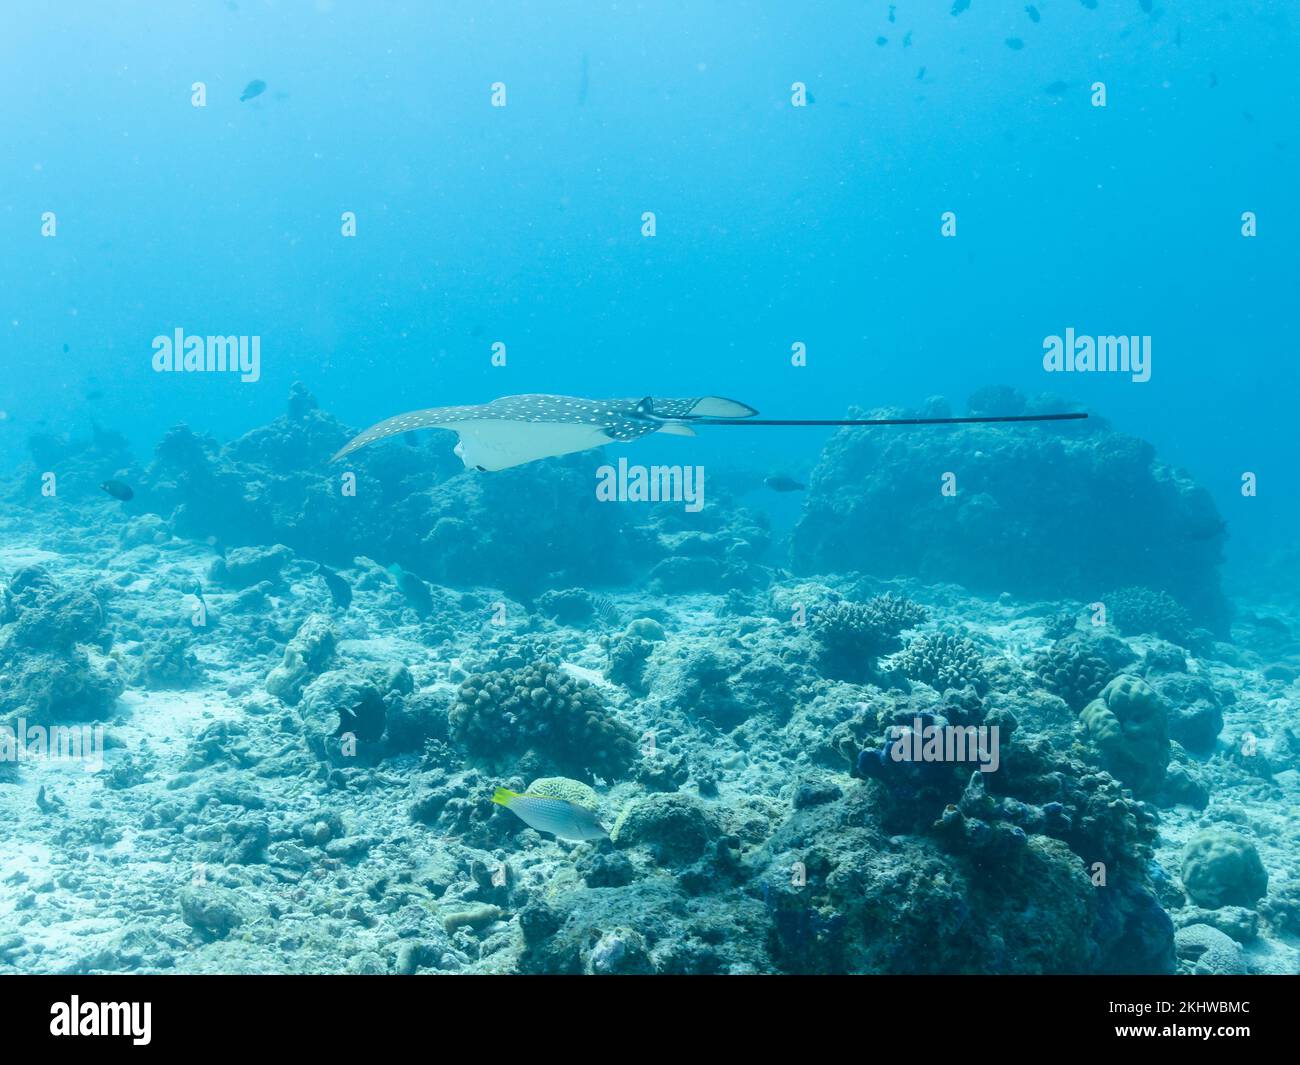 Whitespotted eagle ray in the depths of the Indian ocean, Maldives Stock Photo